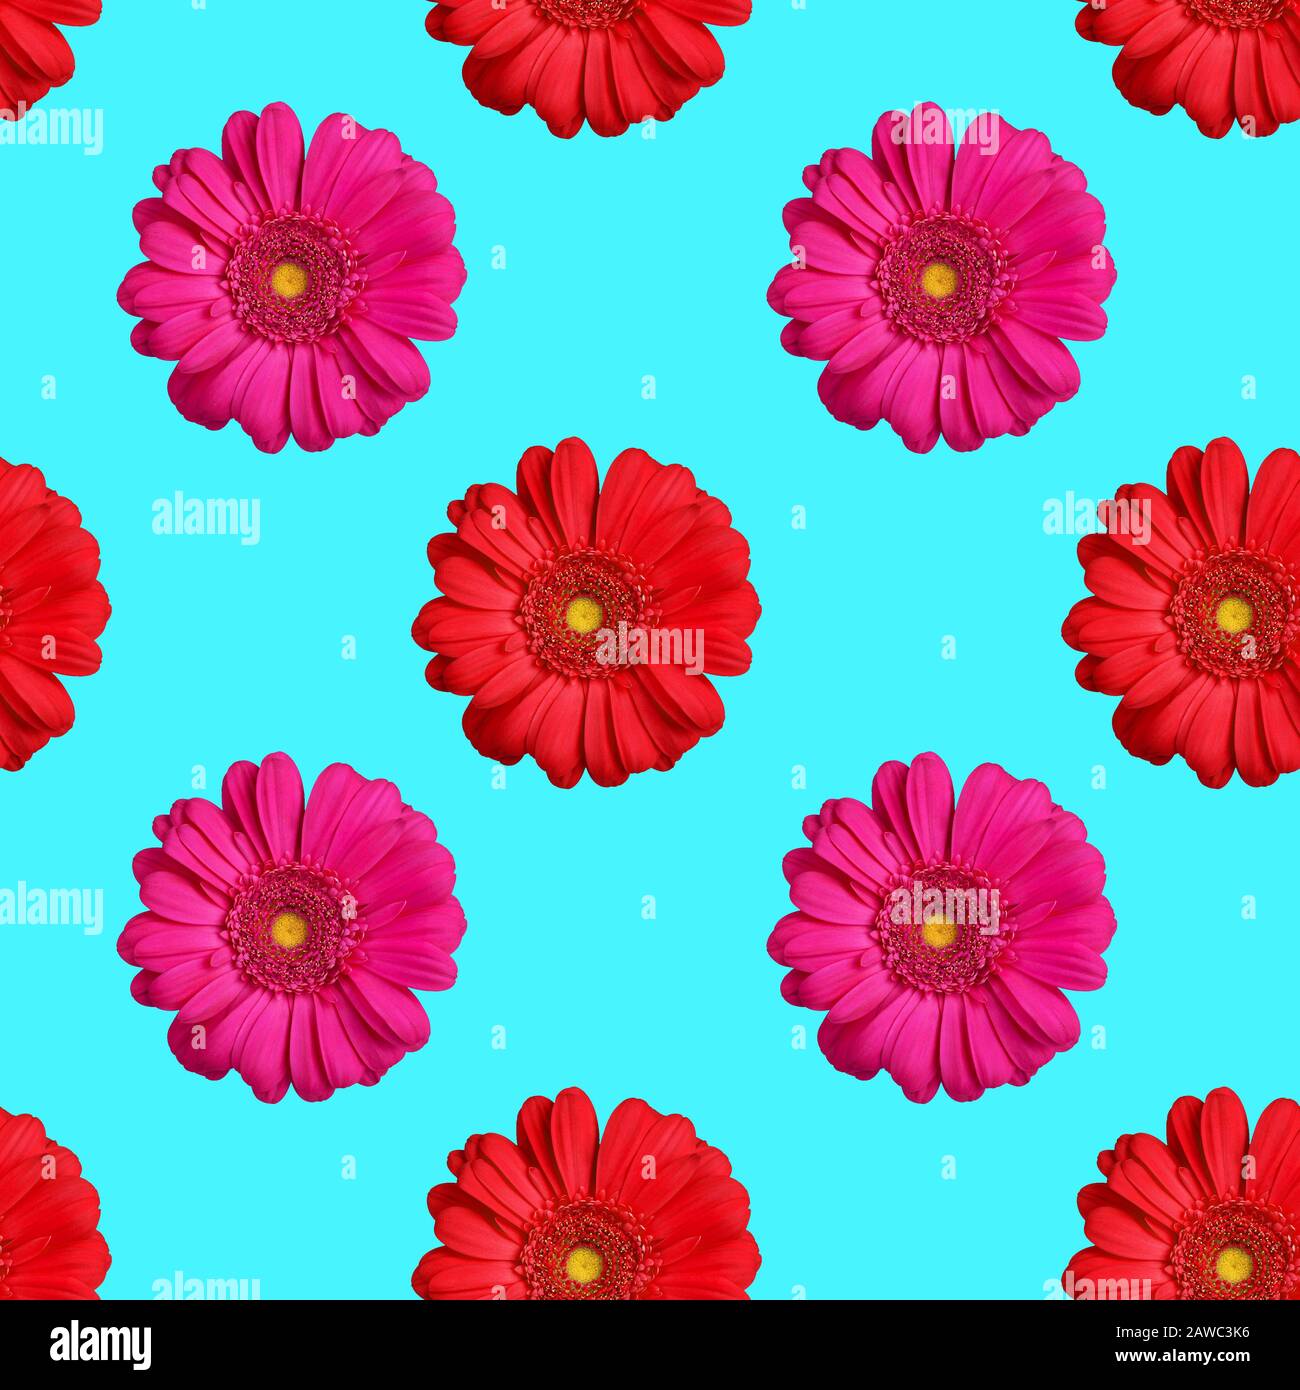 Seamless pattern of red and pink gerbera flowers on blue